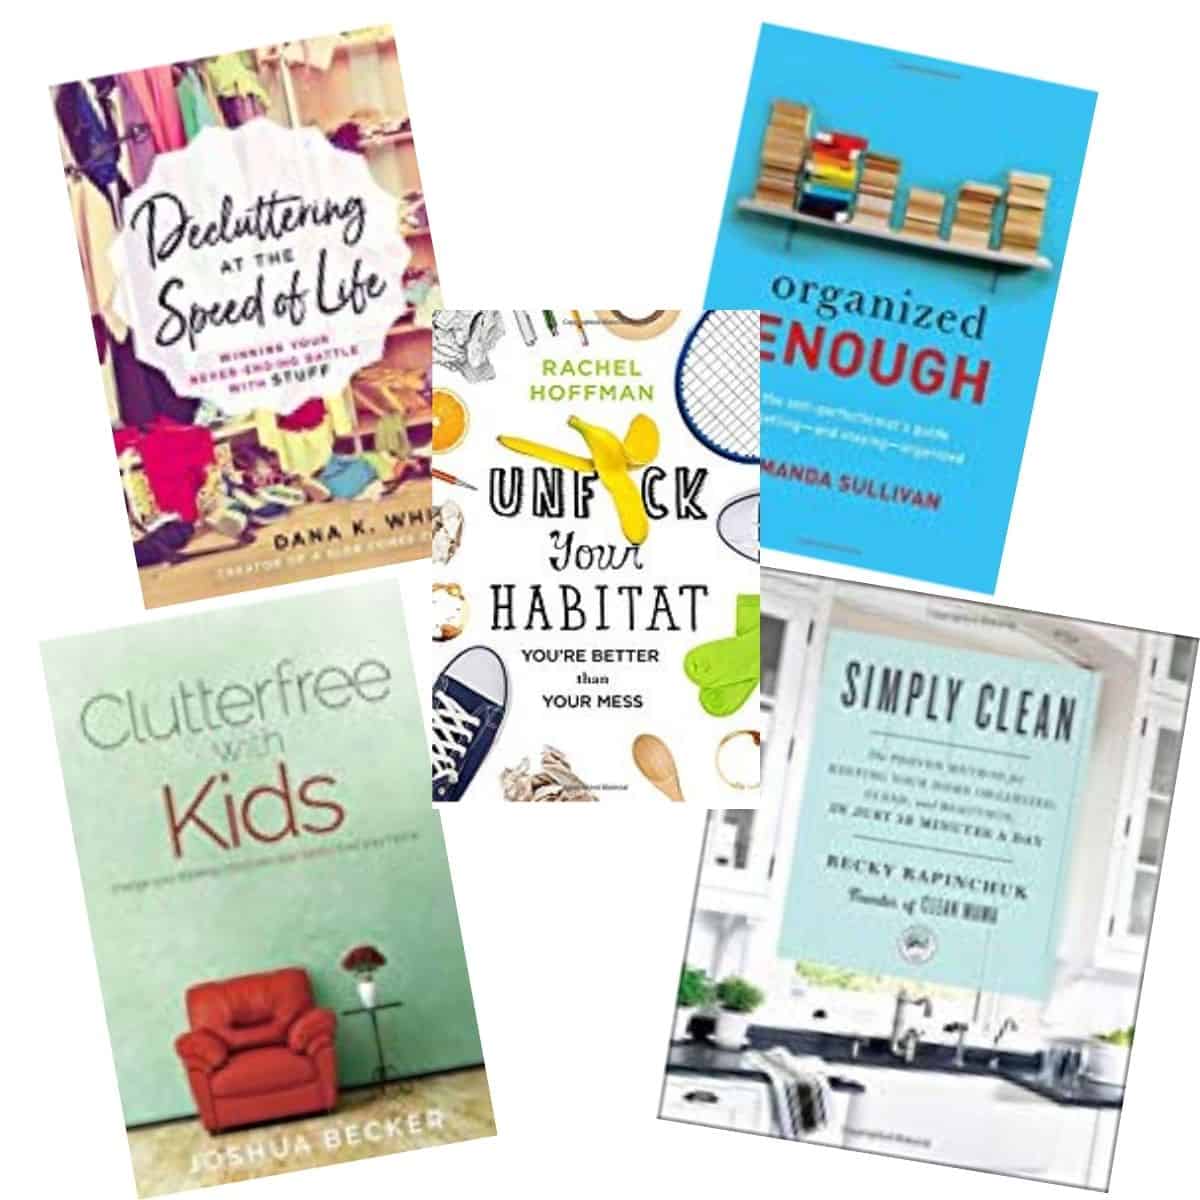 15 Must Read Books to Help You Declutter and Organize Your Home